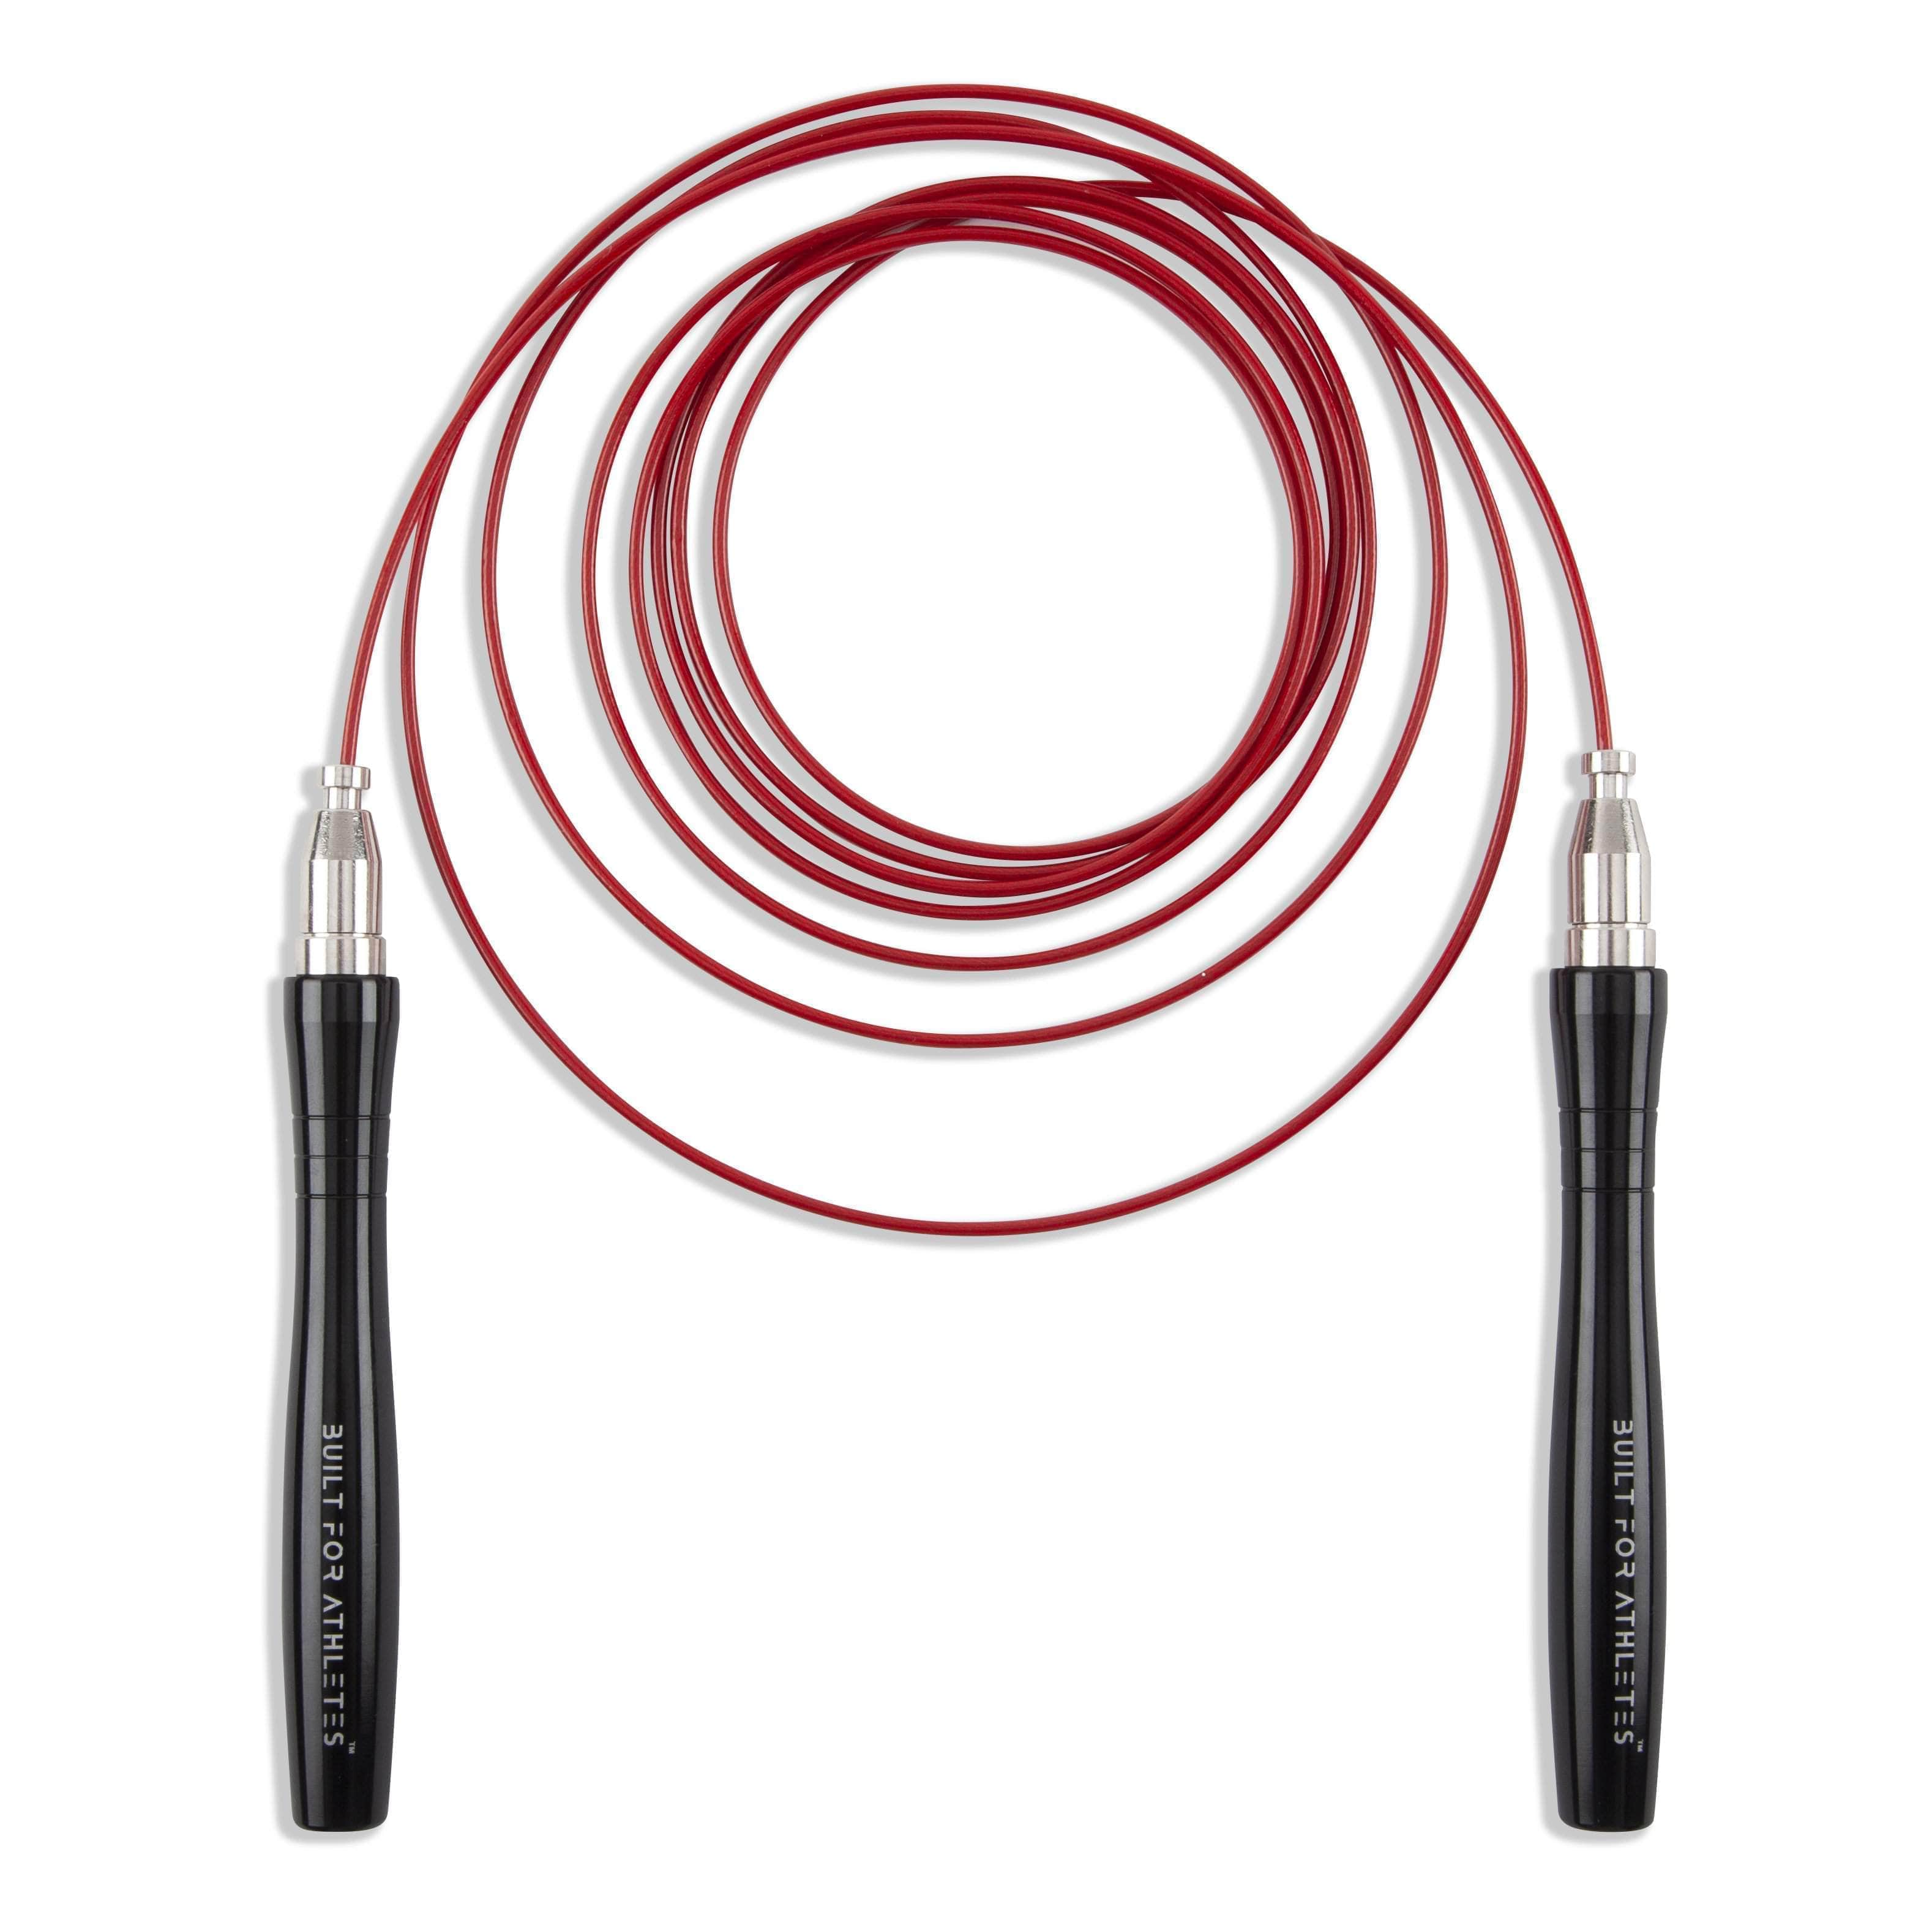 Built for Athletes Accessories BFA Skipping Rope